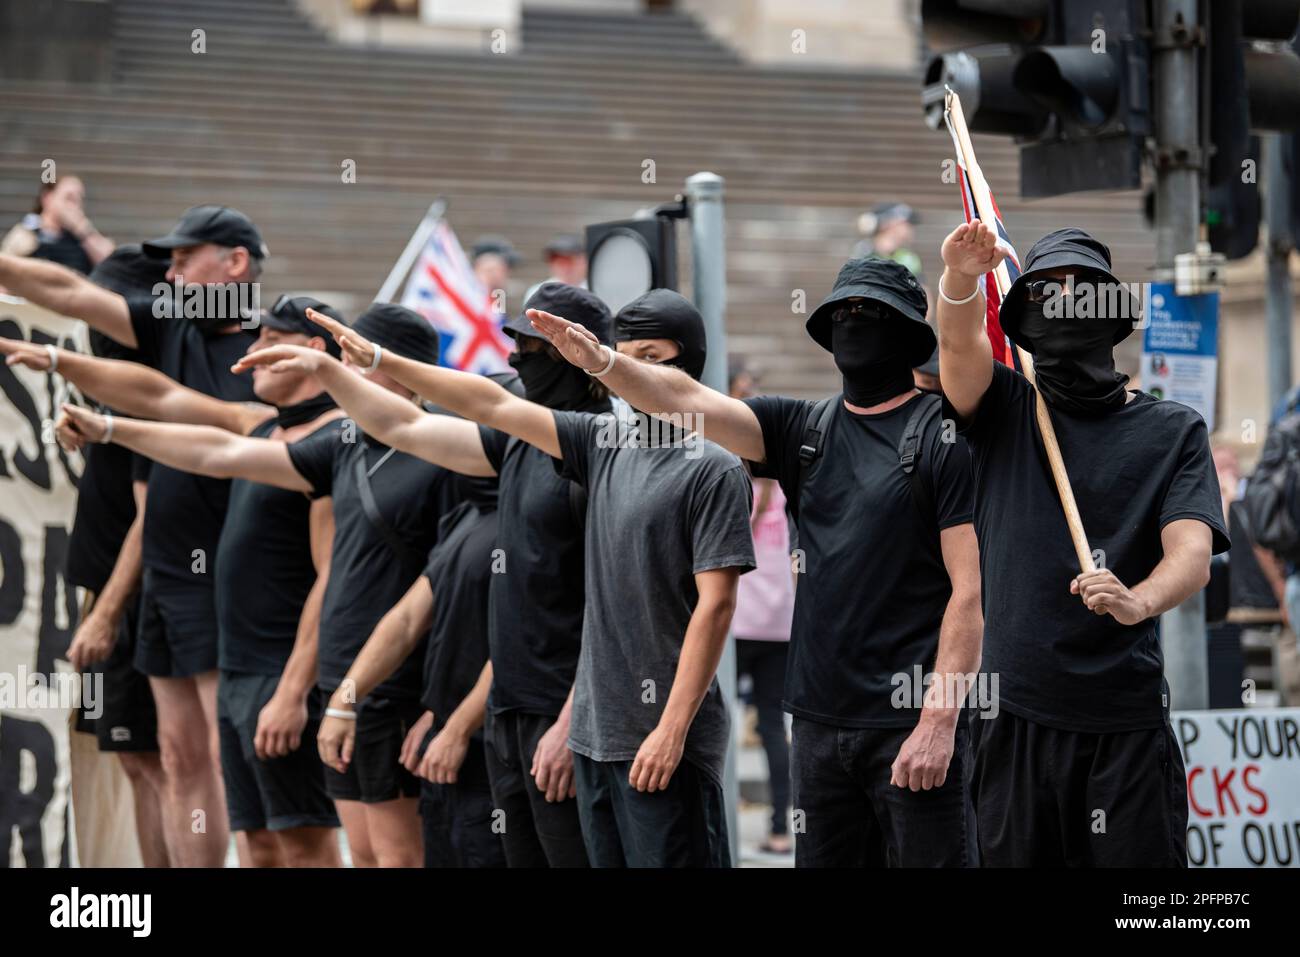 Melbourne, Australia, March 18th 2023. Neo-nazis saluting at counter-protesters at a Trans Exclusionary Radical Feminist (TERF) rally, where feminists discredit diverse gender identities, specifically transgender women. Credit: Jay Kogler/Alamy Live News Stock Photo